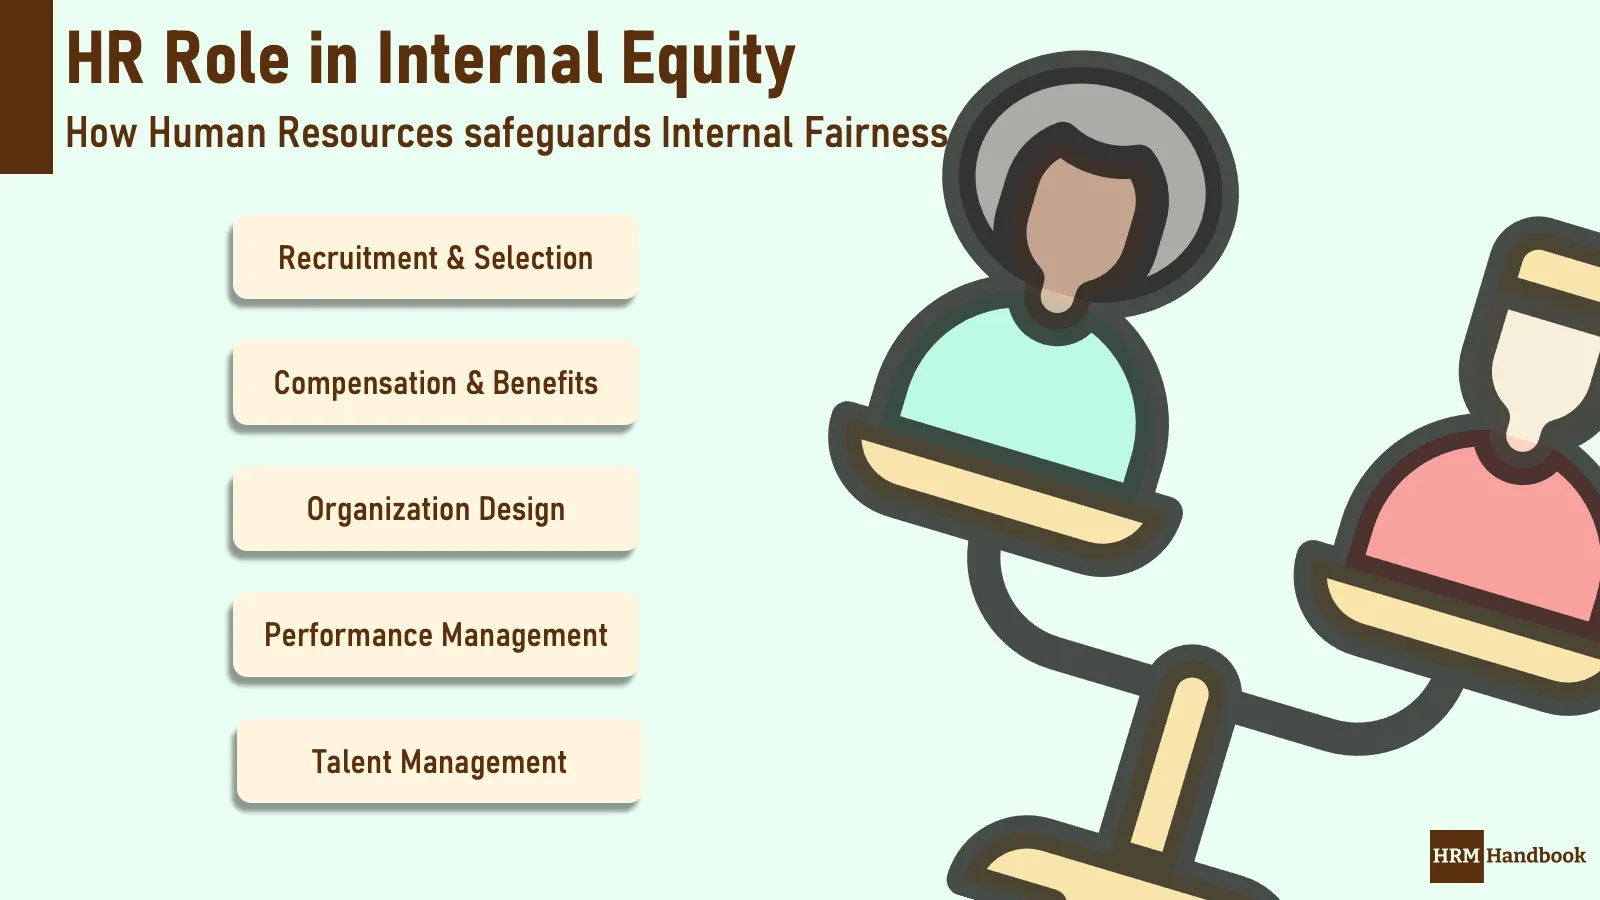 Internal Equity as HR Role